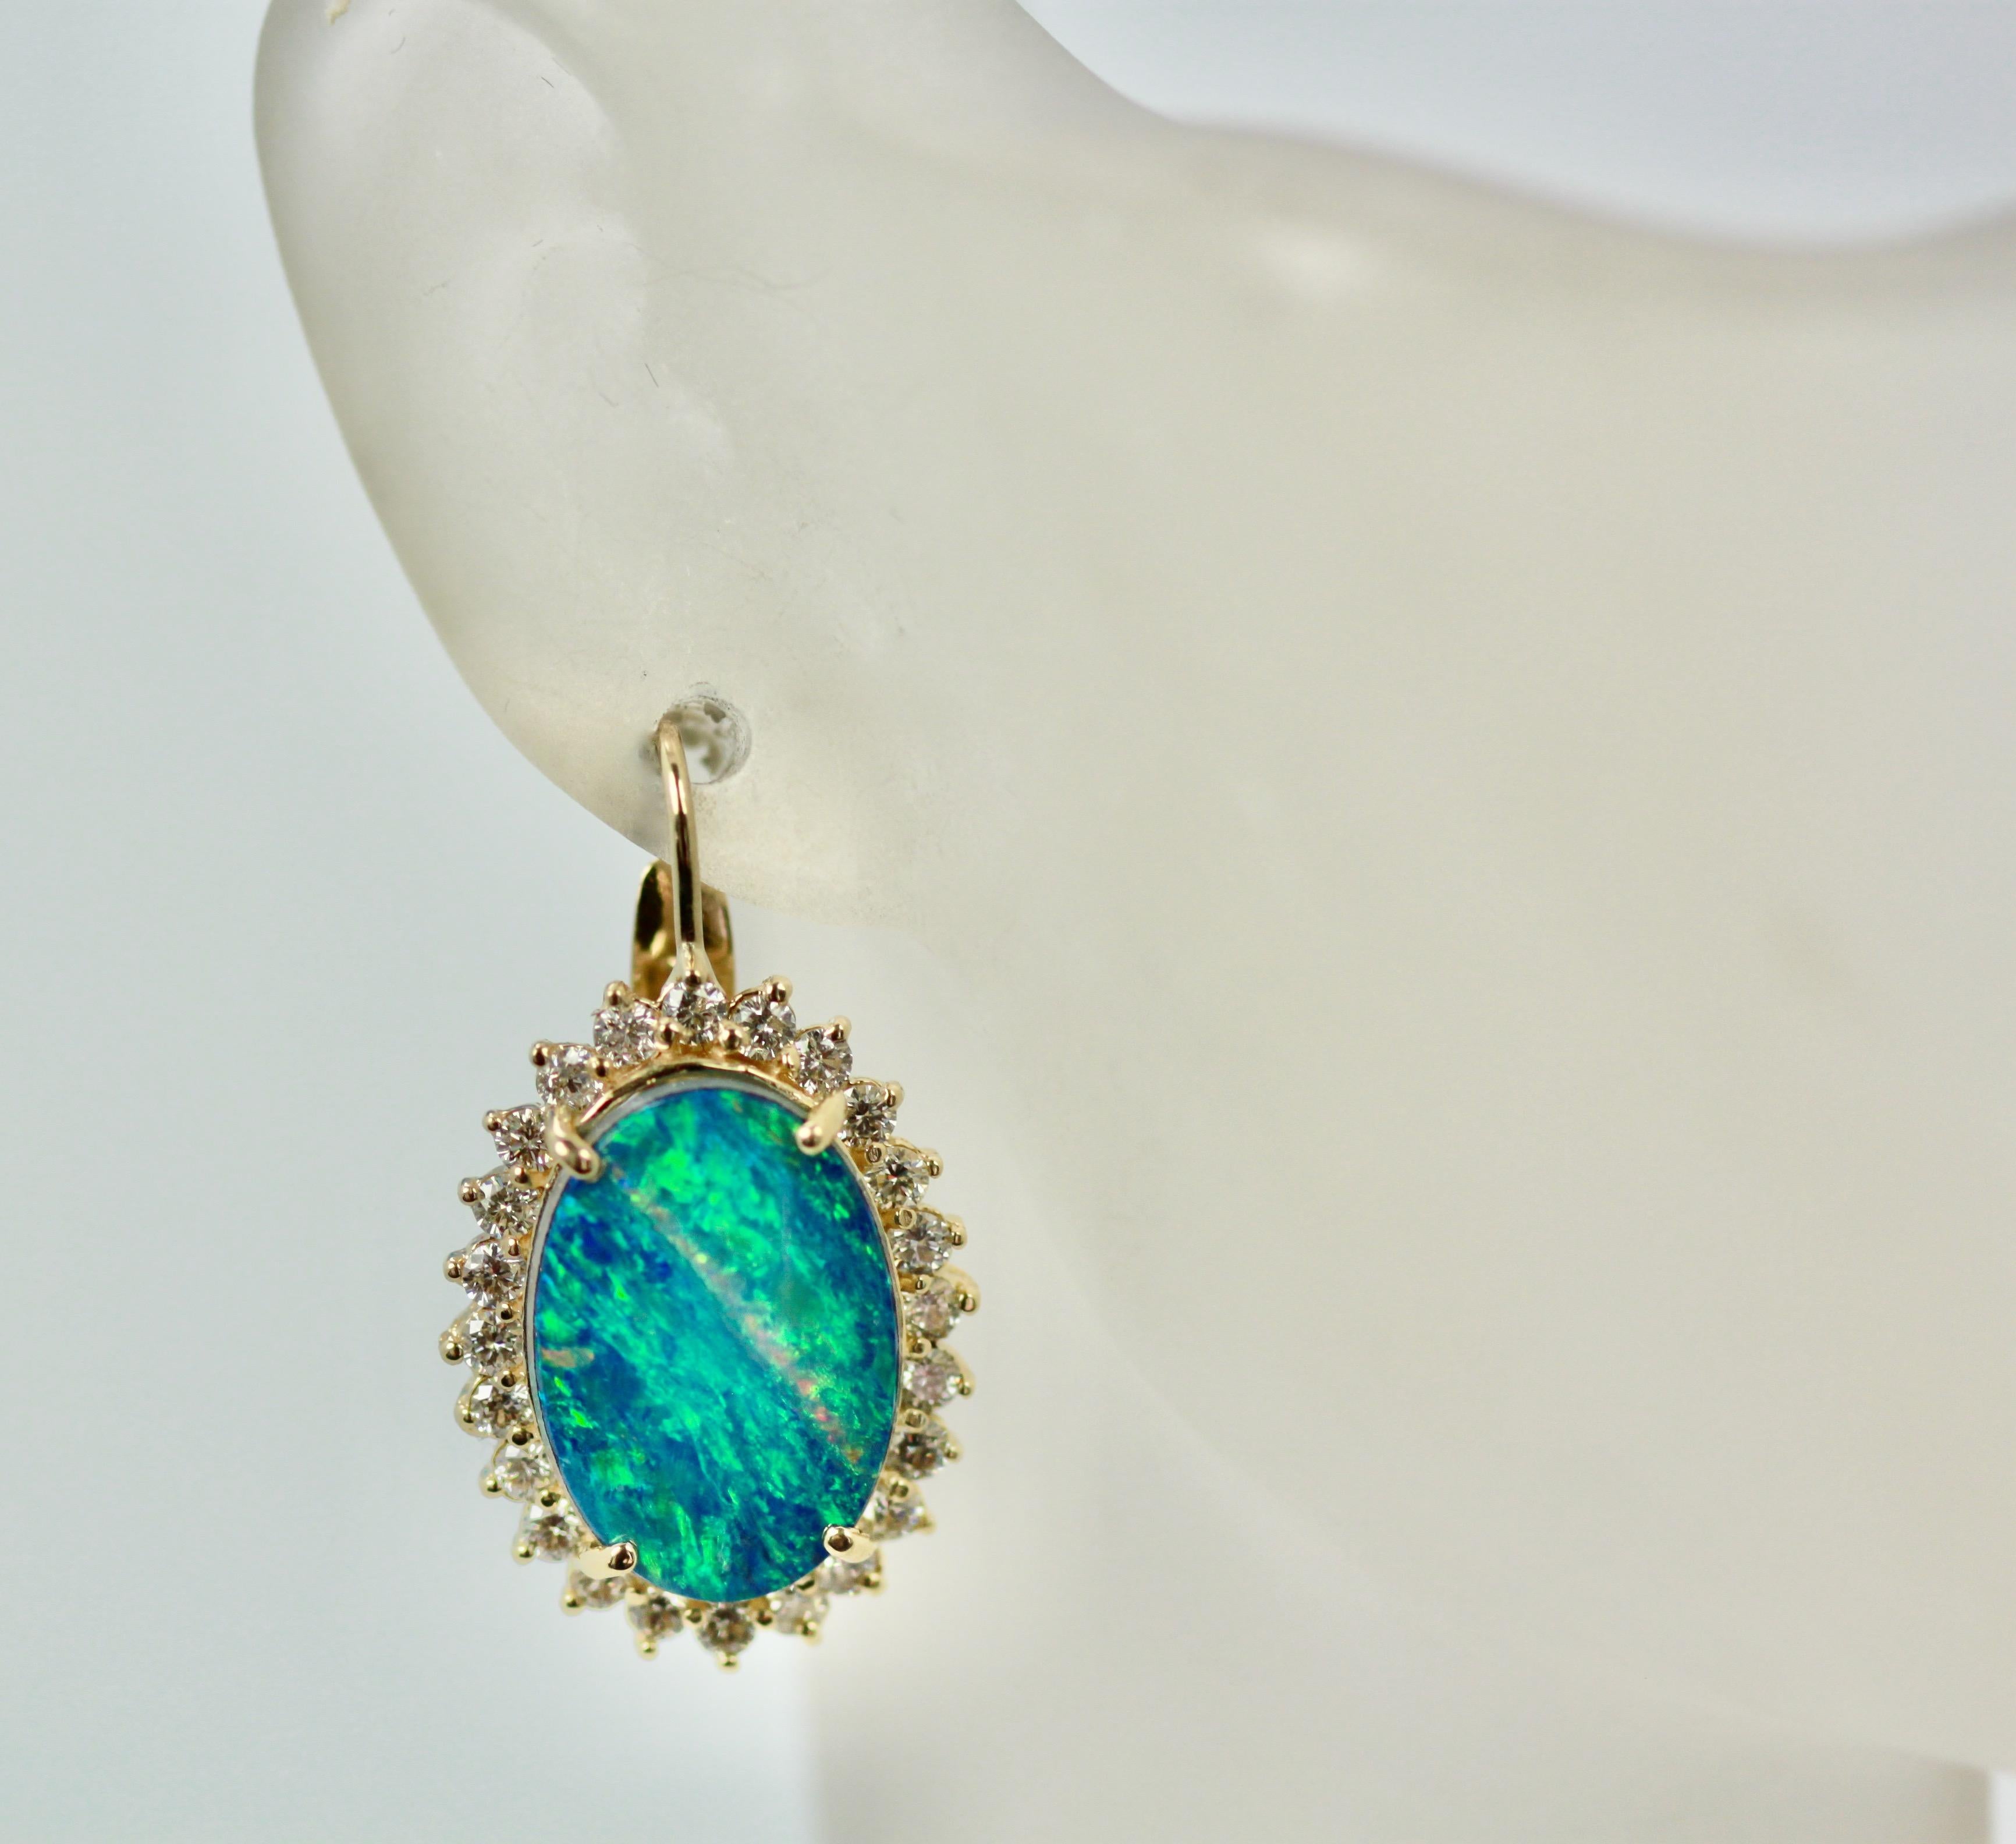 Black Opal Diamond Earrings 14 Karat Yellow Gold In Good Condition For Sale In North Hollywood, CA